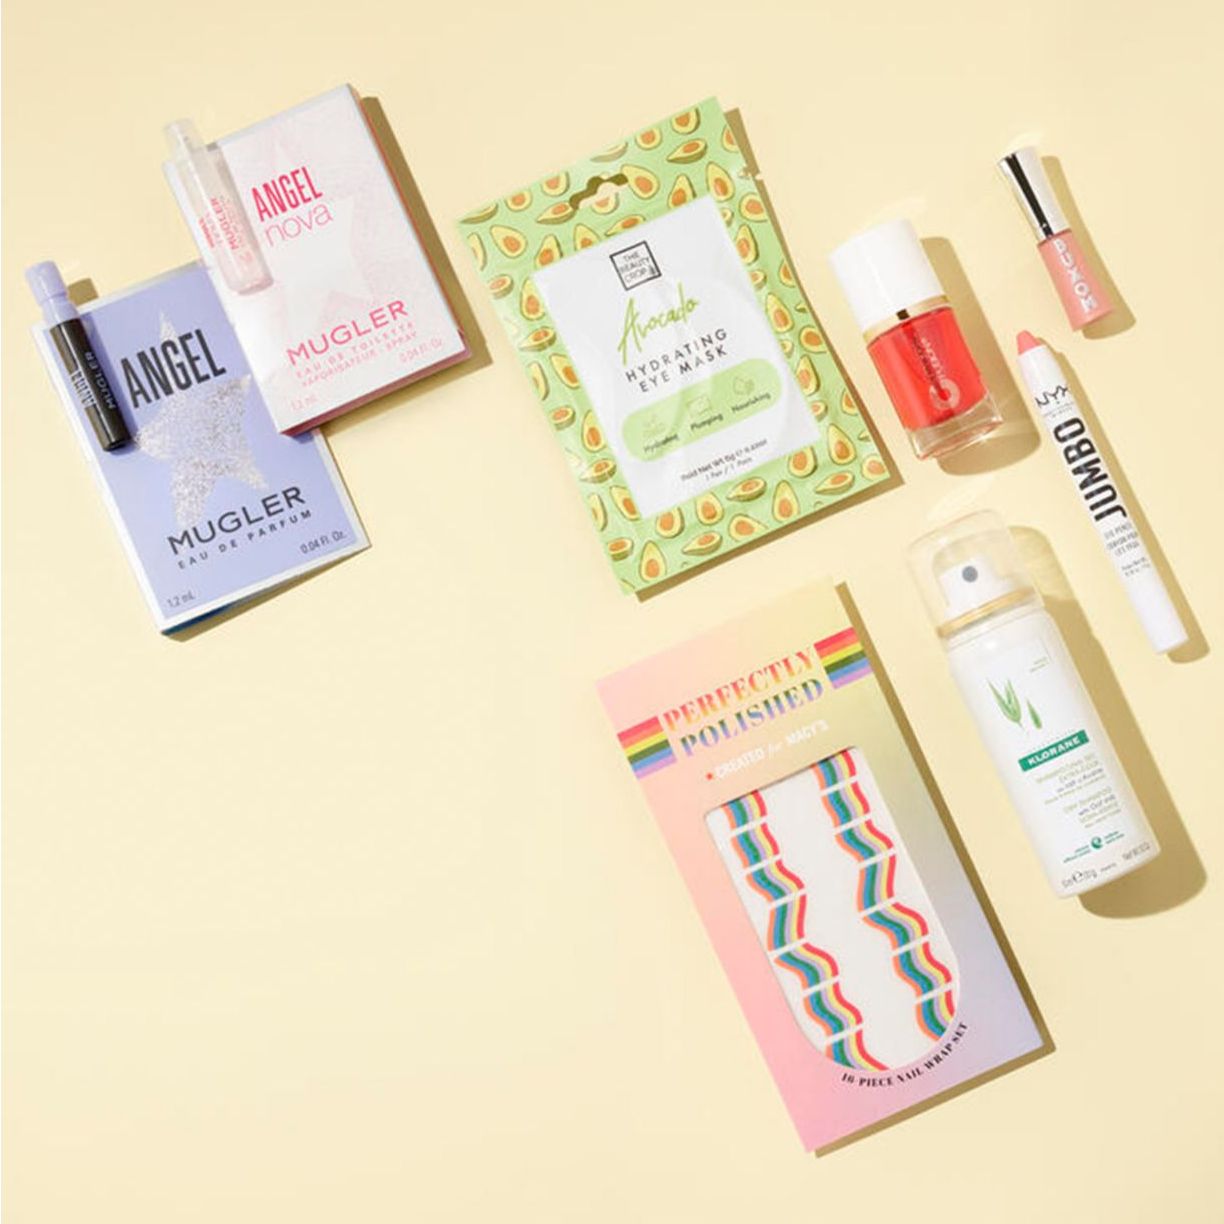 4-Piece Carry On Clique Travel Size Beauty Set (Buxom Lip Gloss, Lancôme Absolue Cream, Estée Lauder Cleanser, Tonymoly Mask) $6 & More + Free Store Pickup at Macy's or FS on $25+